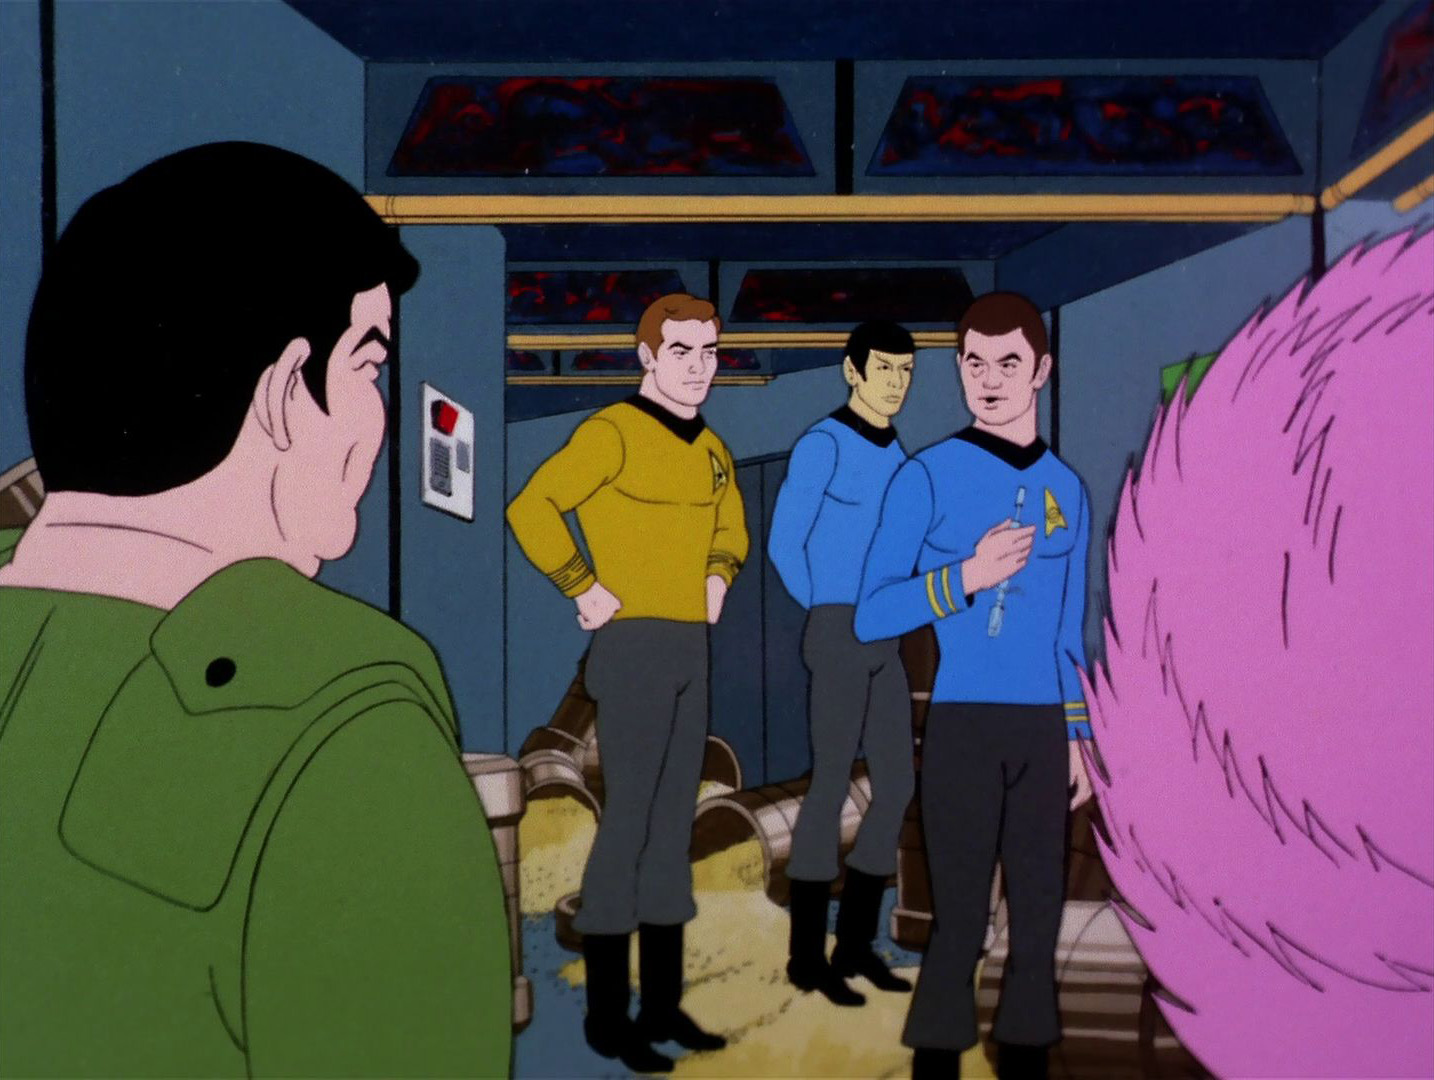 Star Trek animated Series. Heavy Gear: the animated Series. Series he is a